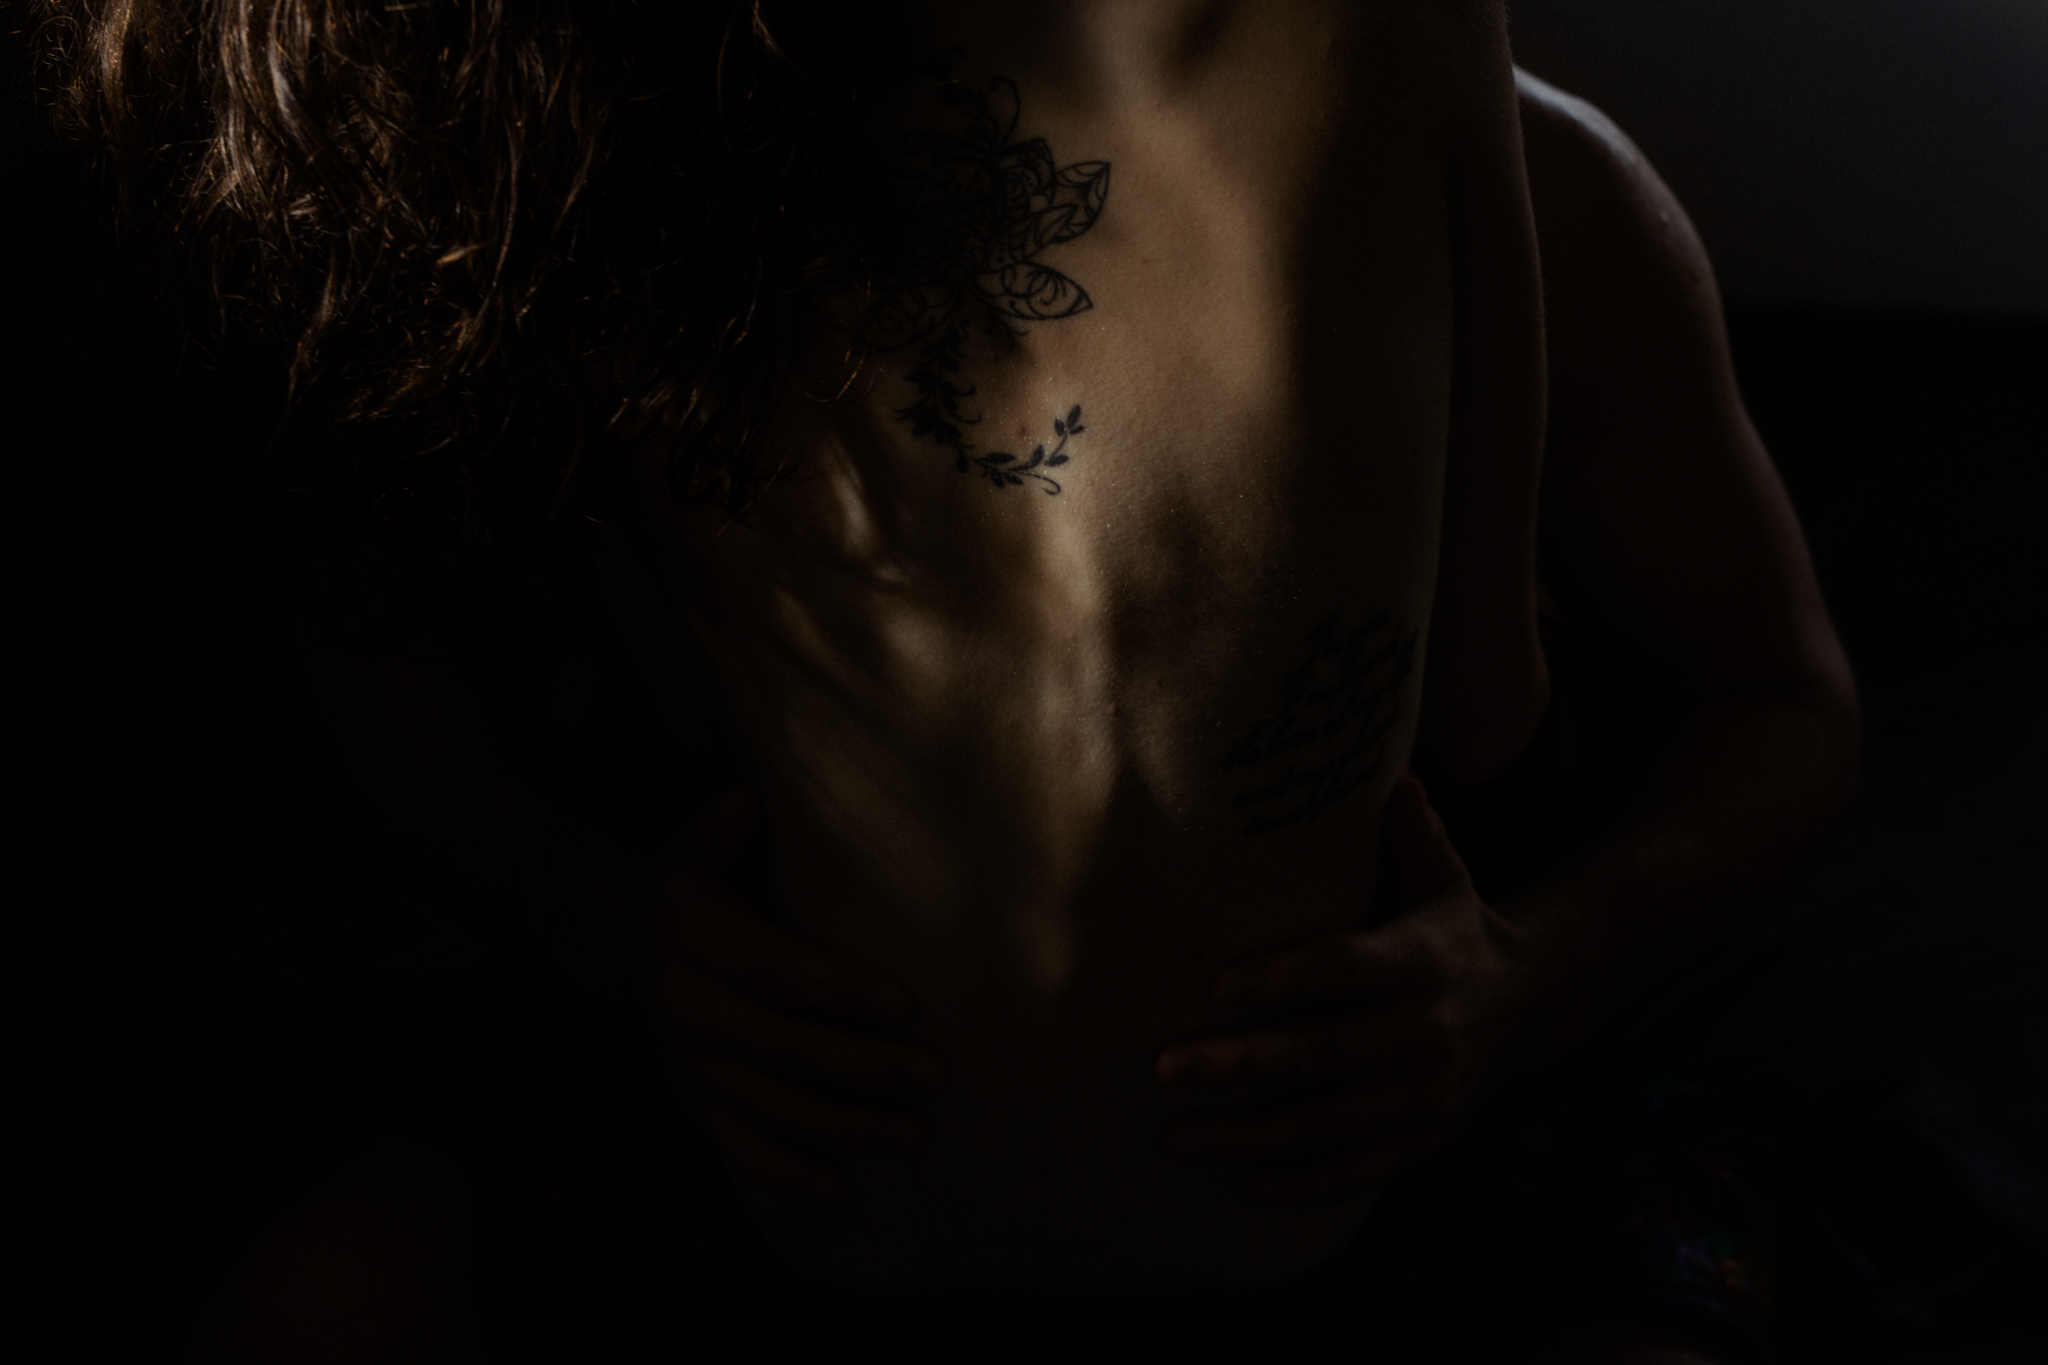 mike and jade columbus ohio couple's boudoir photography by sarah rose